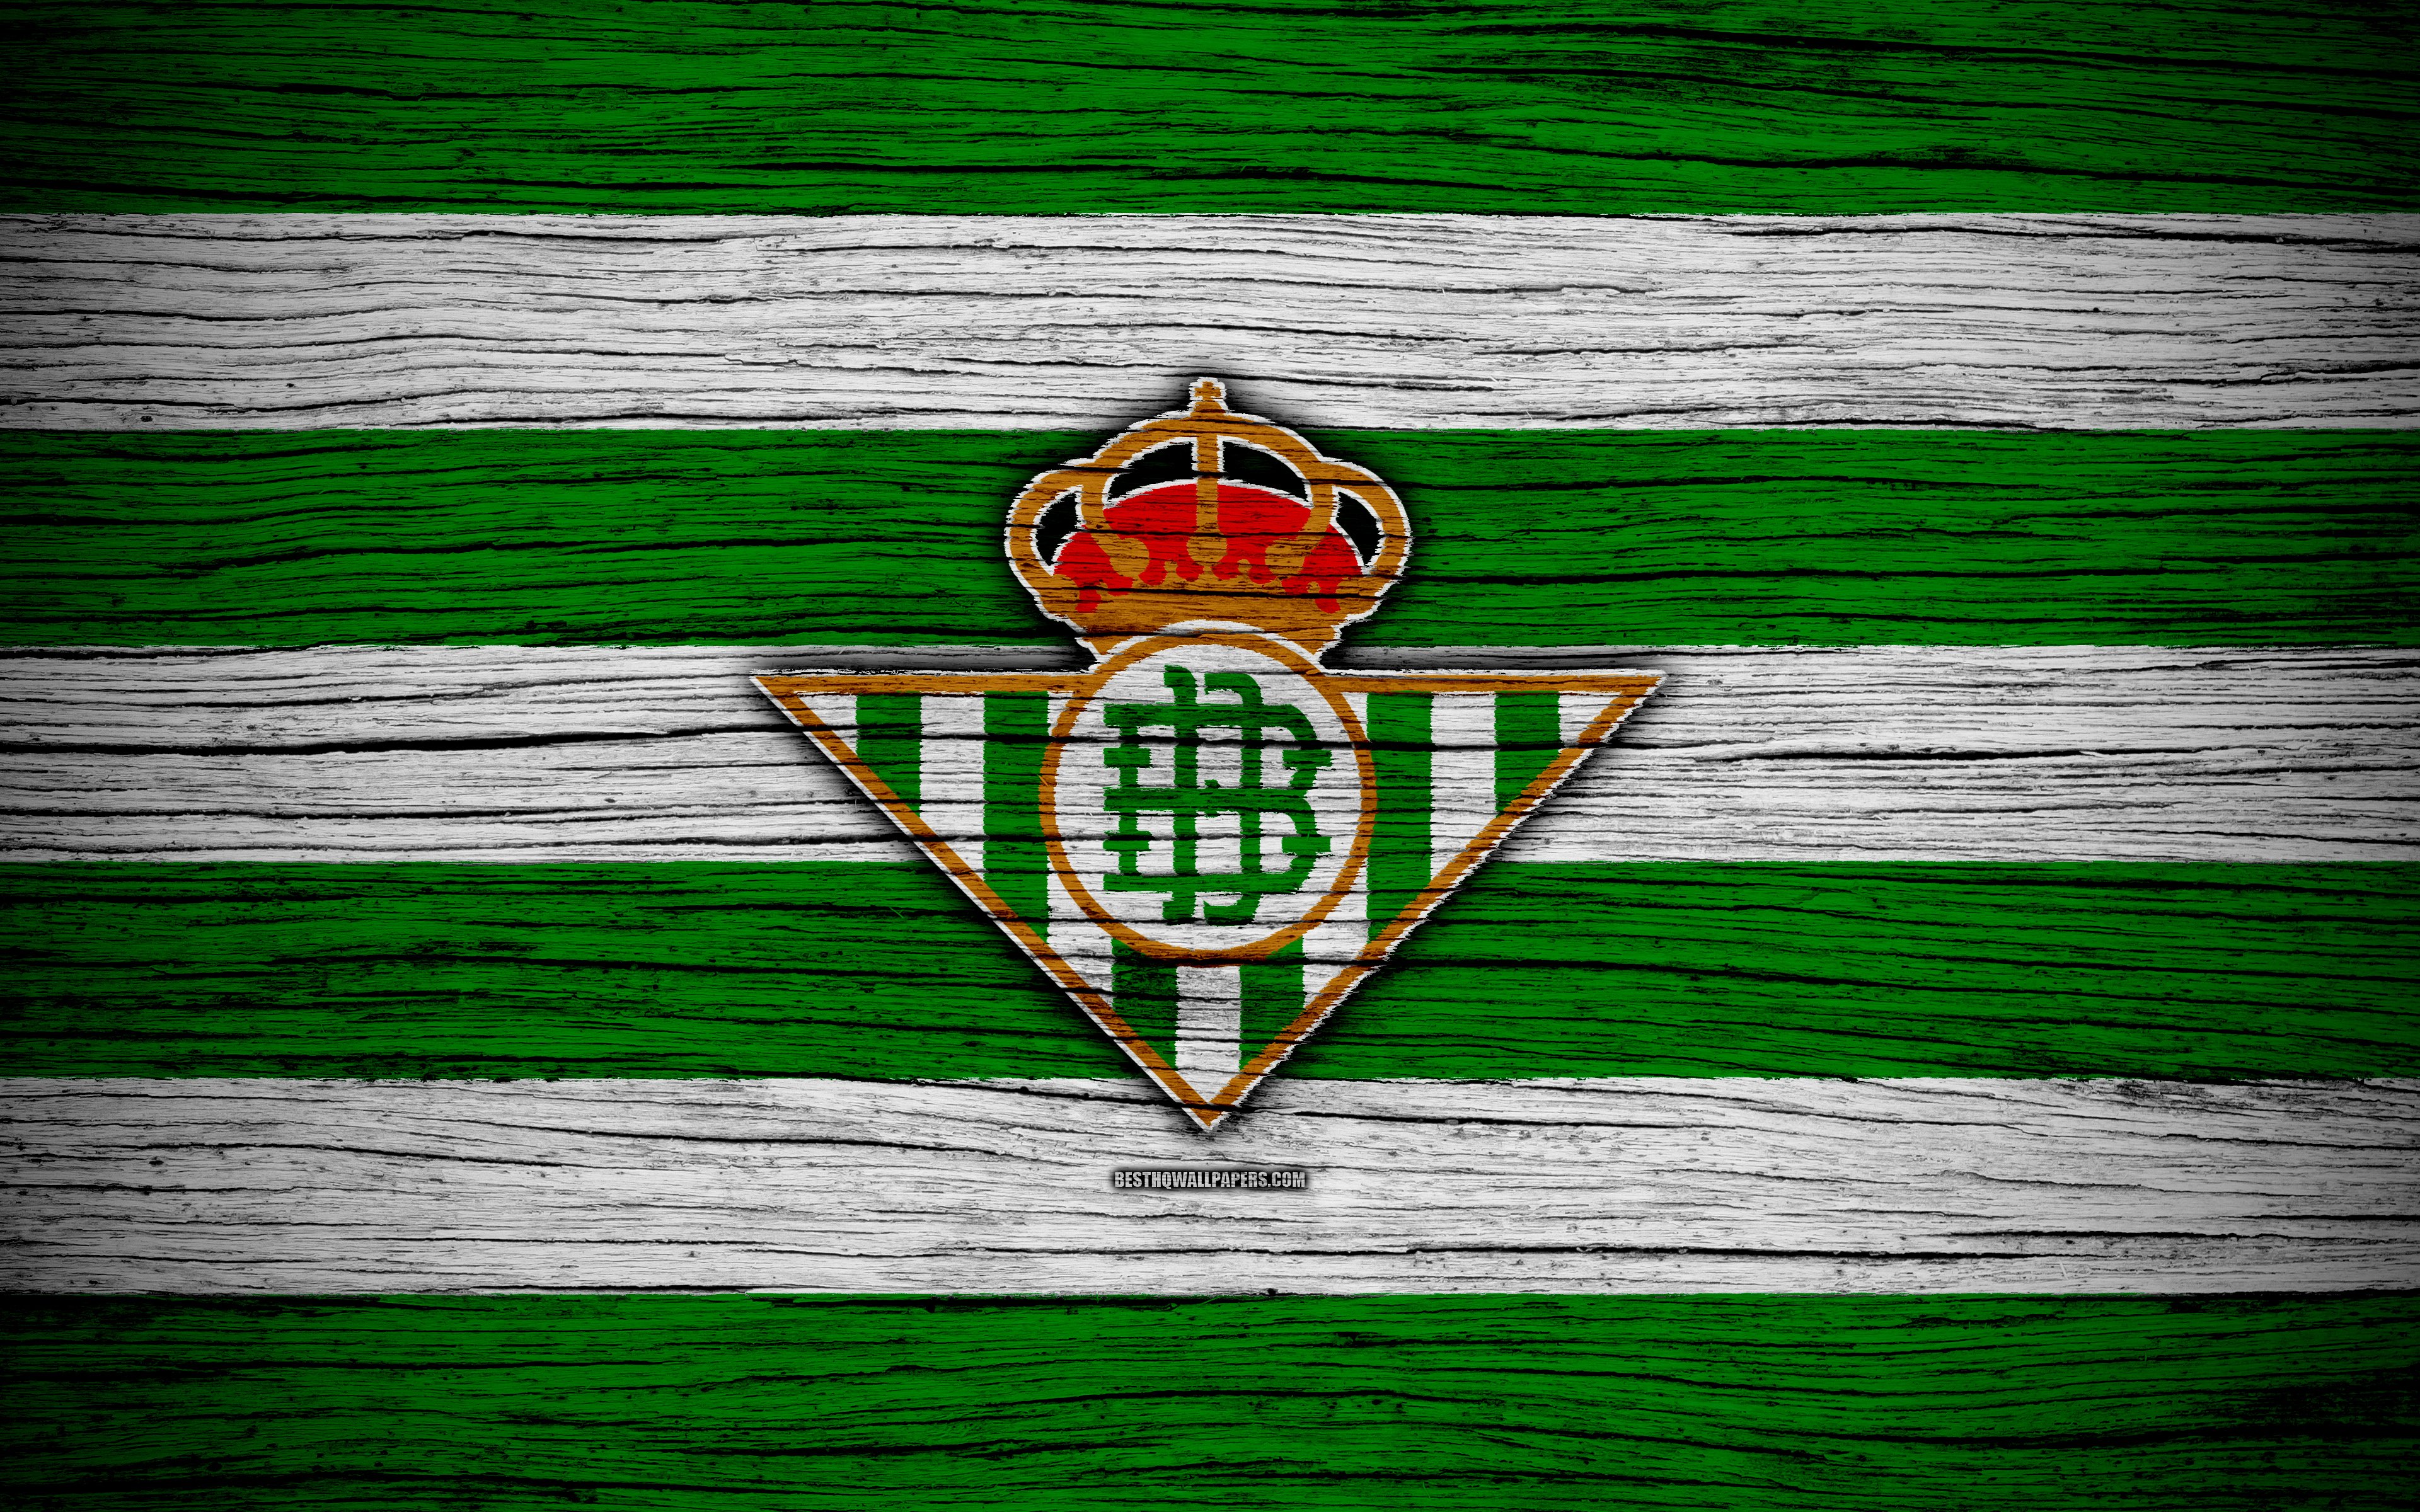 Real Betis 4k Ultra HD Wallpaper Background Image 3840x2400